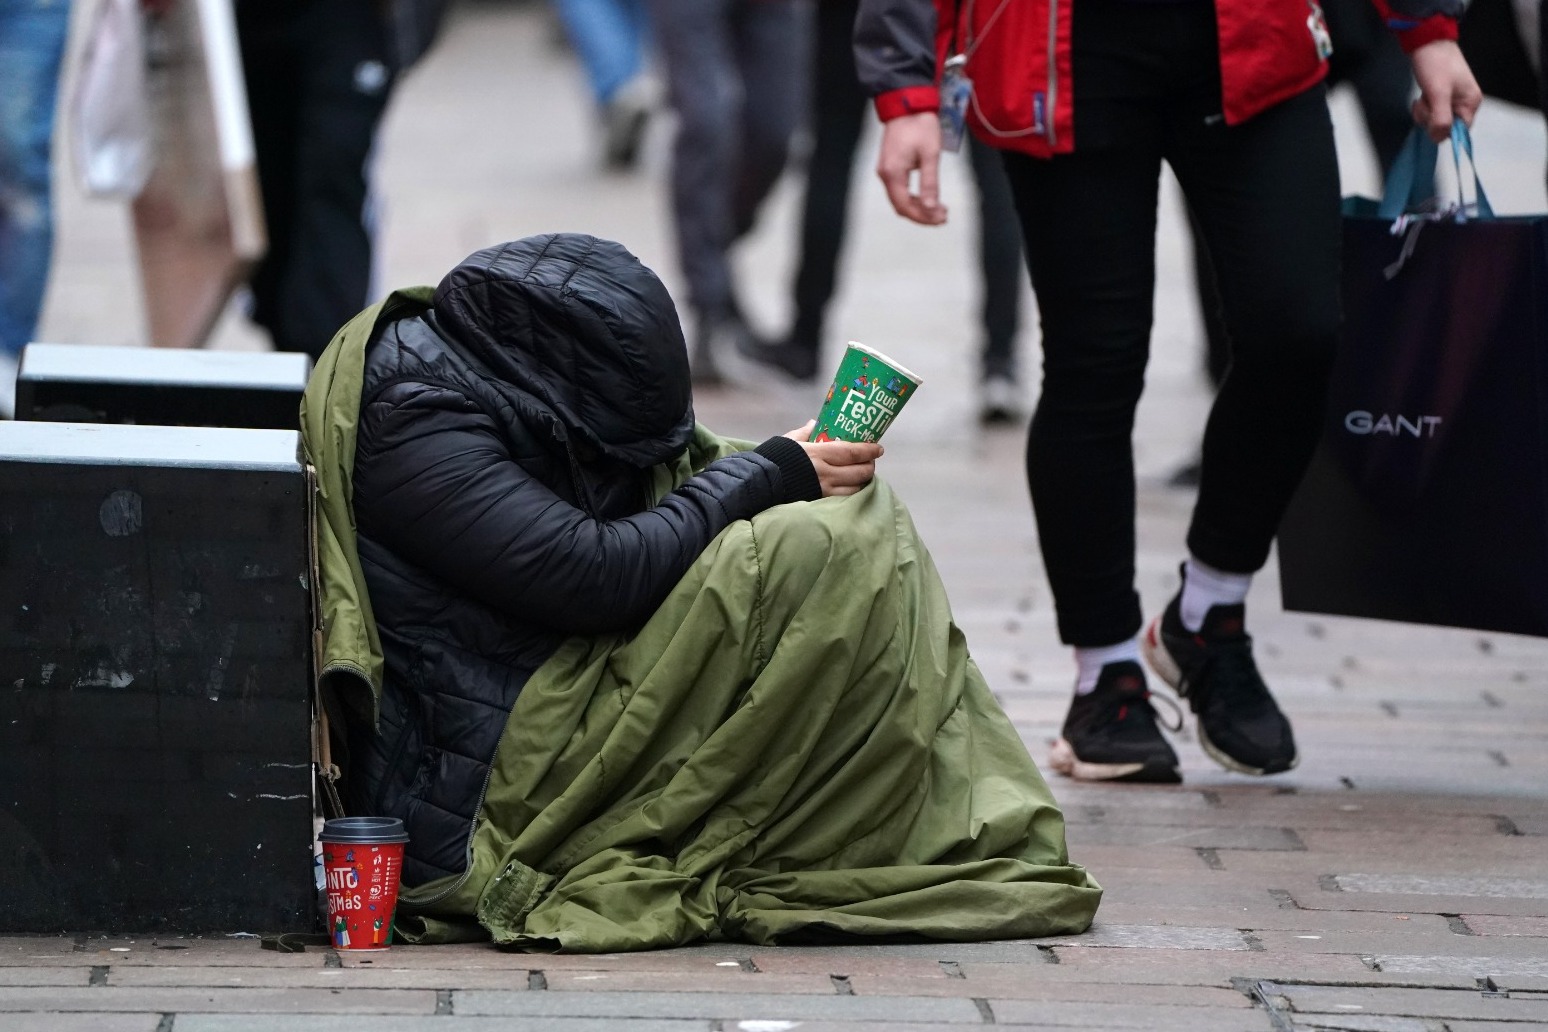 Contingency plan to protect homeless from high temperatures 